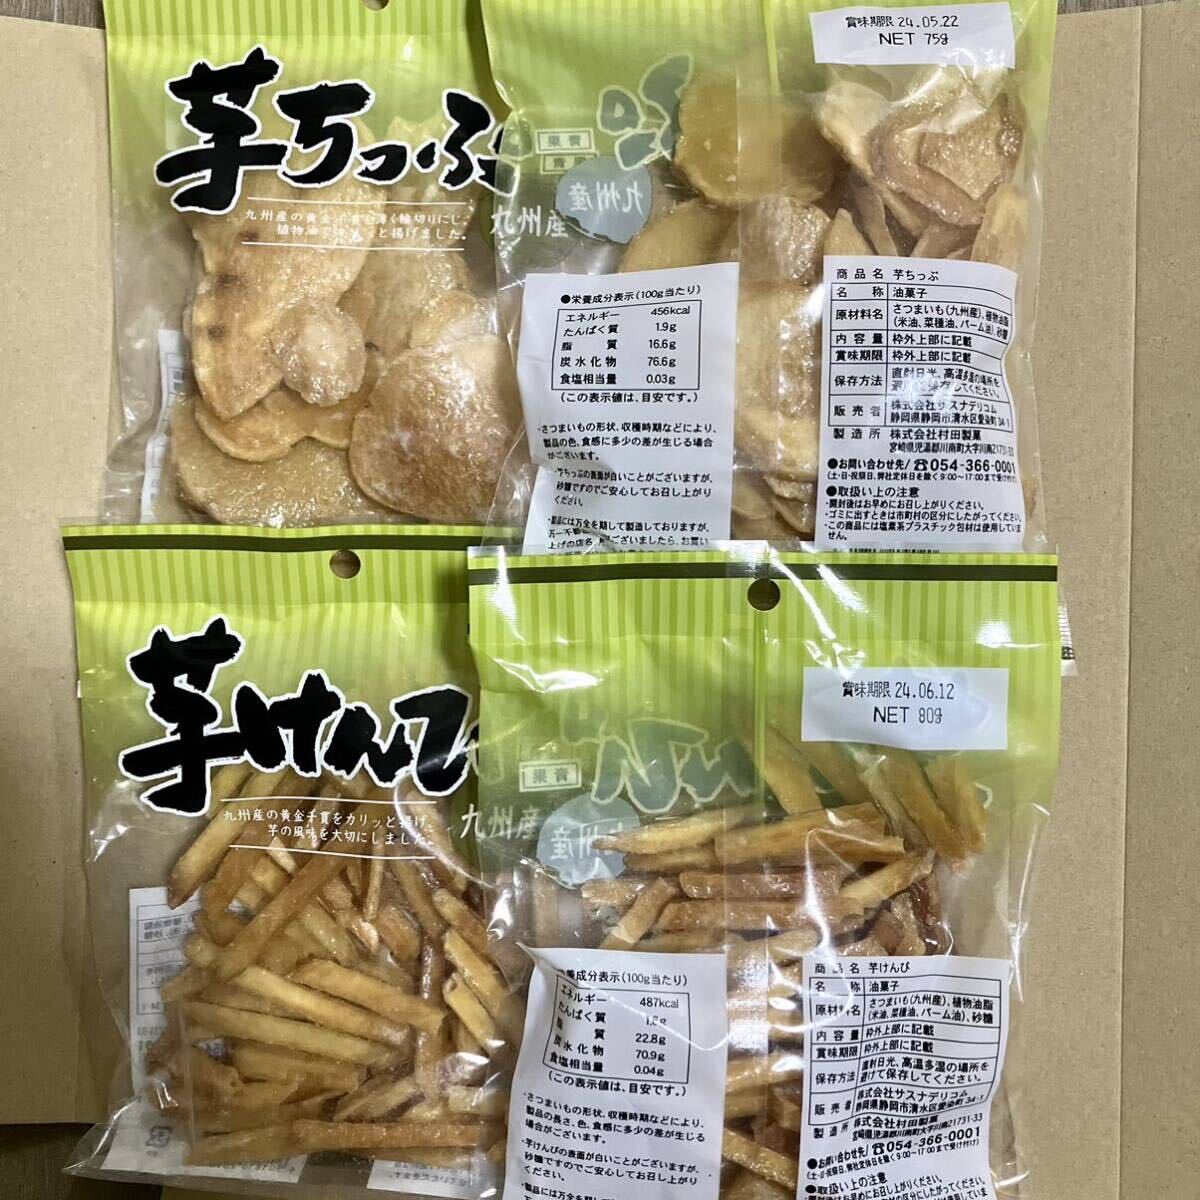 [ box inserting shipping ] Kyushu production sweet potato corm ... corm ...4 sack corm chip s..... Kyushu production yellow gold thousand . former times while. bite 